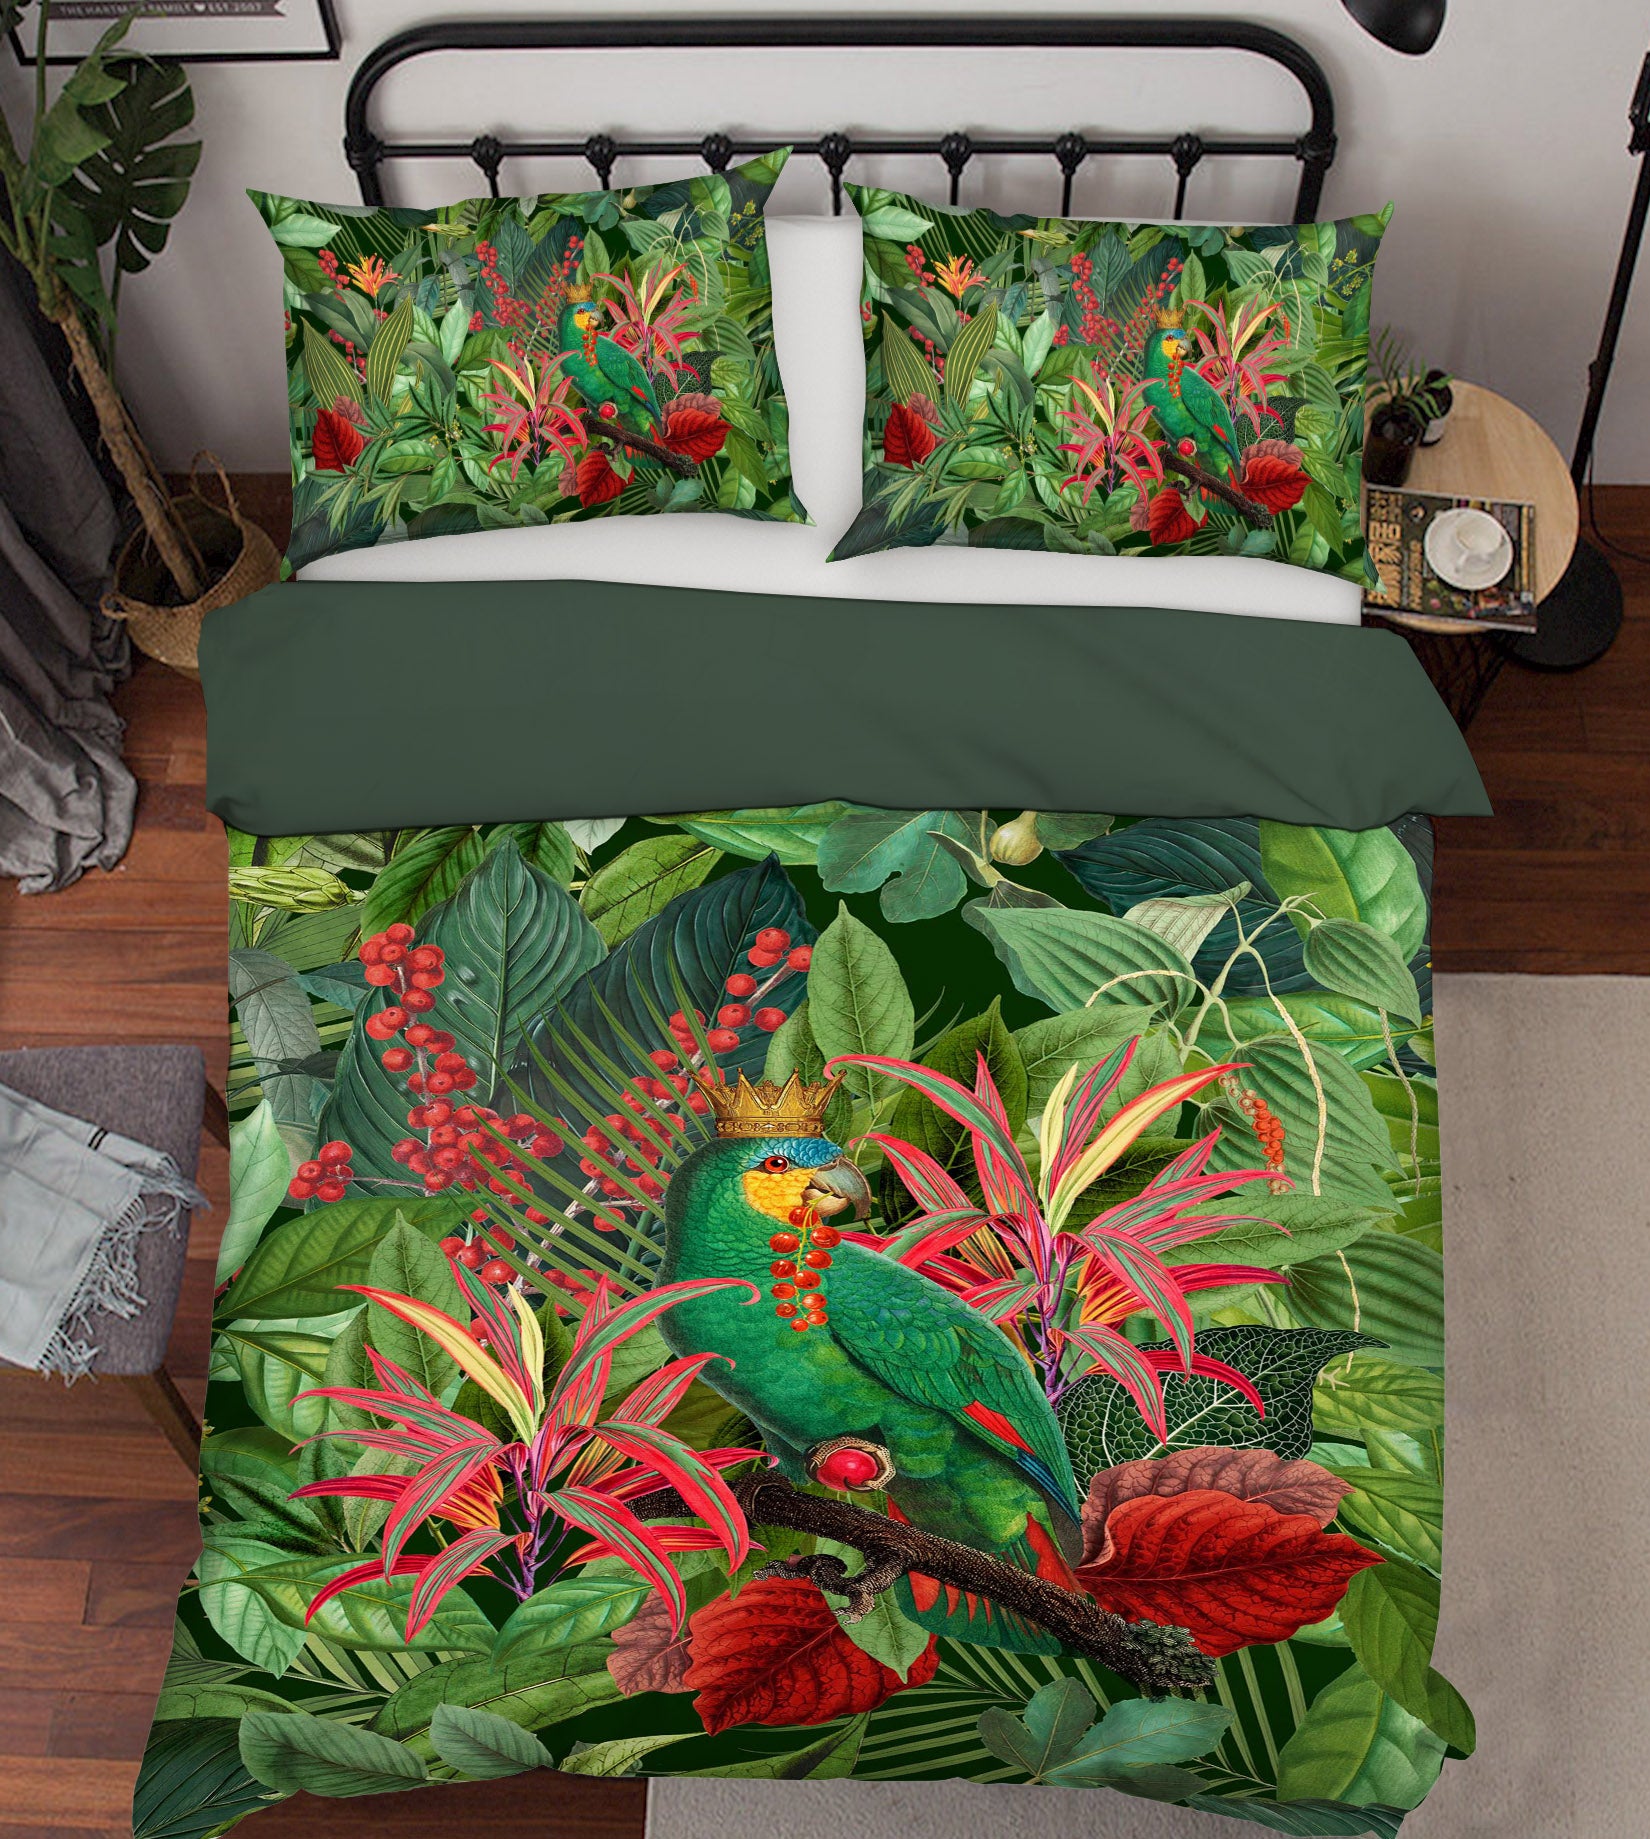 3D Red Flower Forest 102 Andrea haase Bedding Bed Pillowcases Quilt